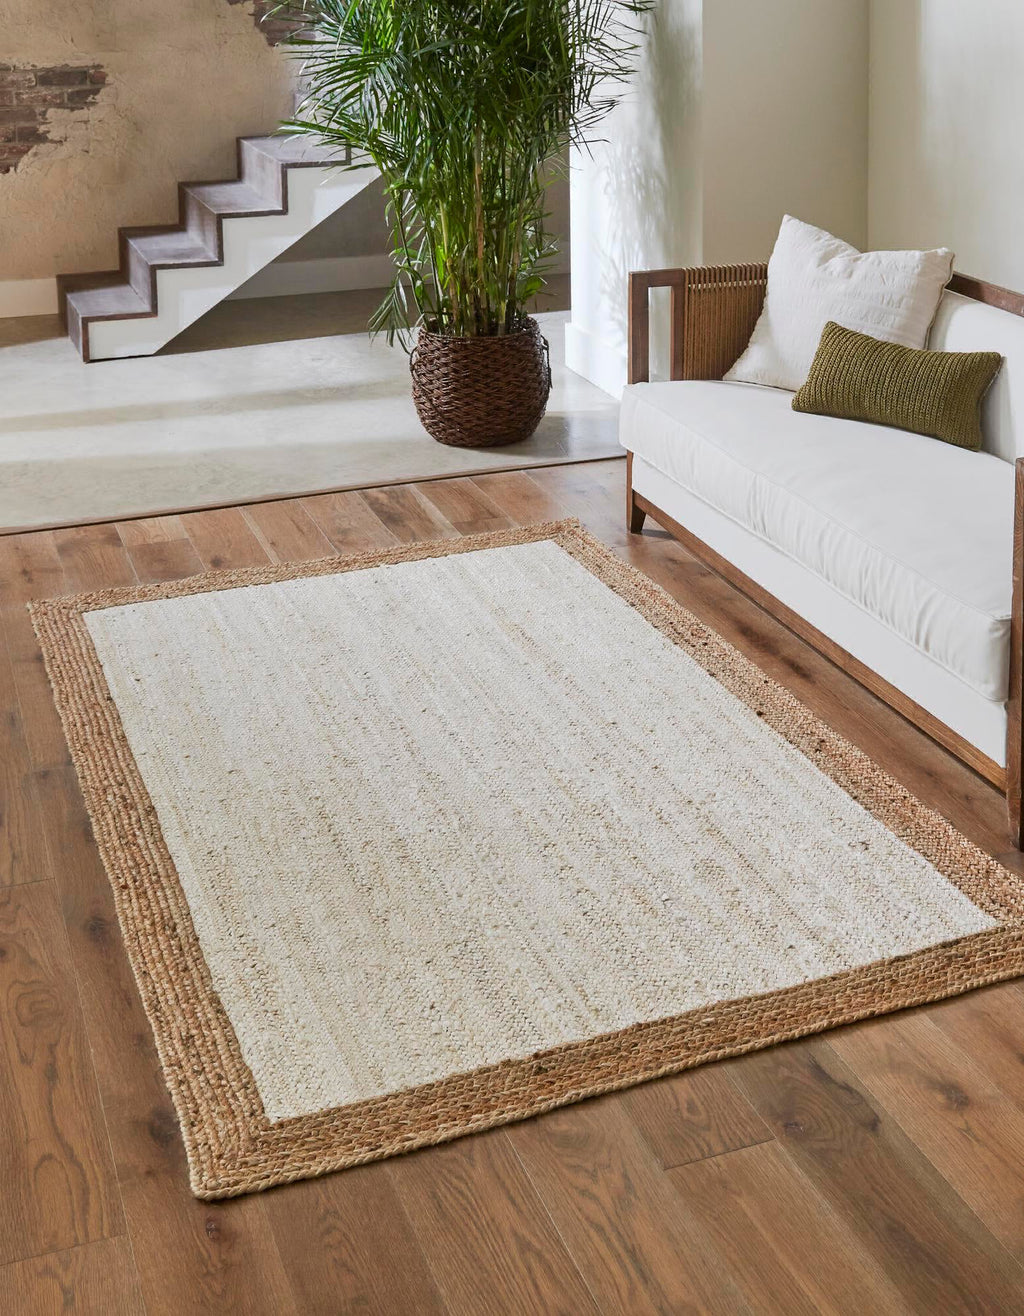 Unique Loom Braided Jute MGN-4 White Area Rug Rectangle Lifestyle Image Feature